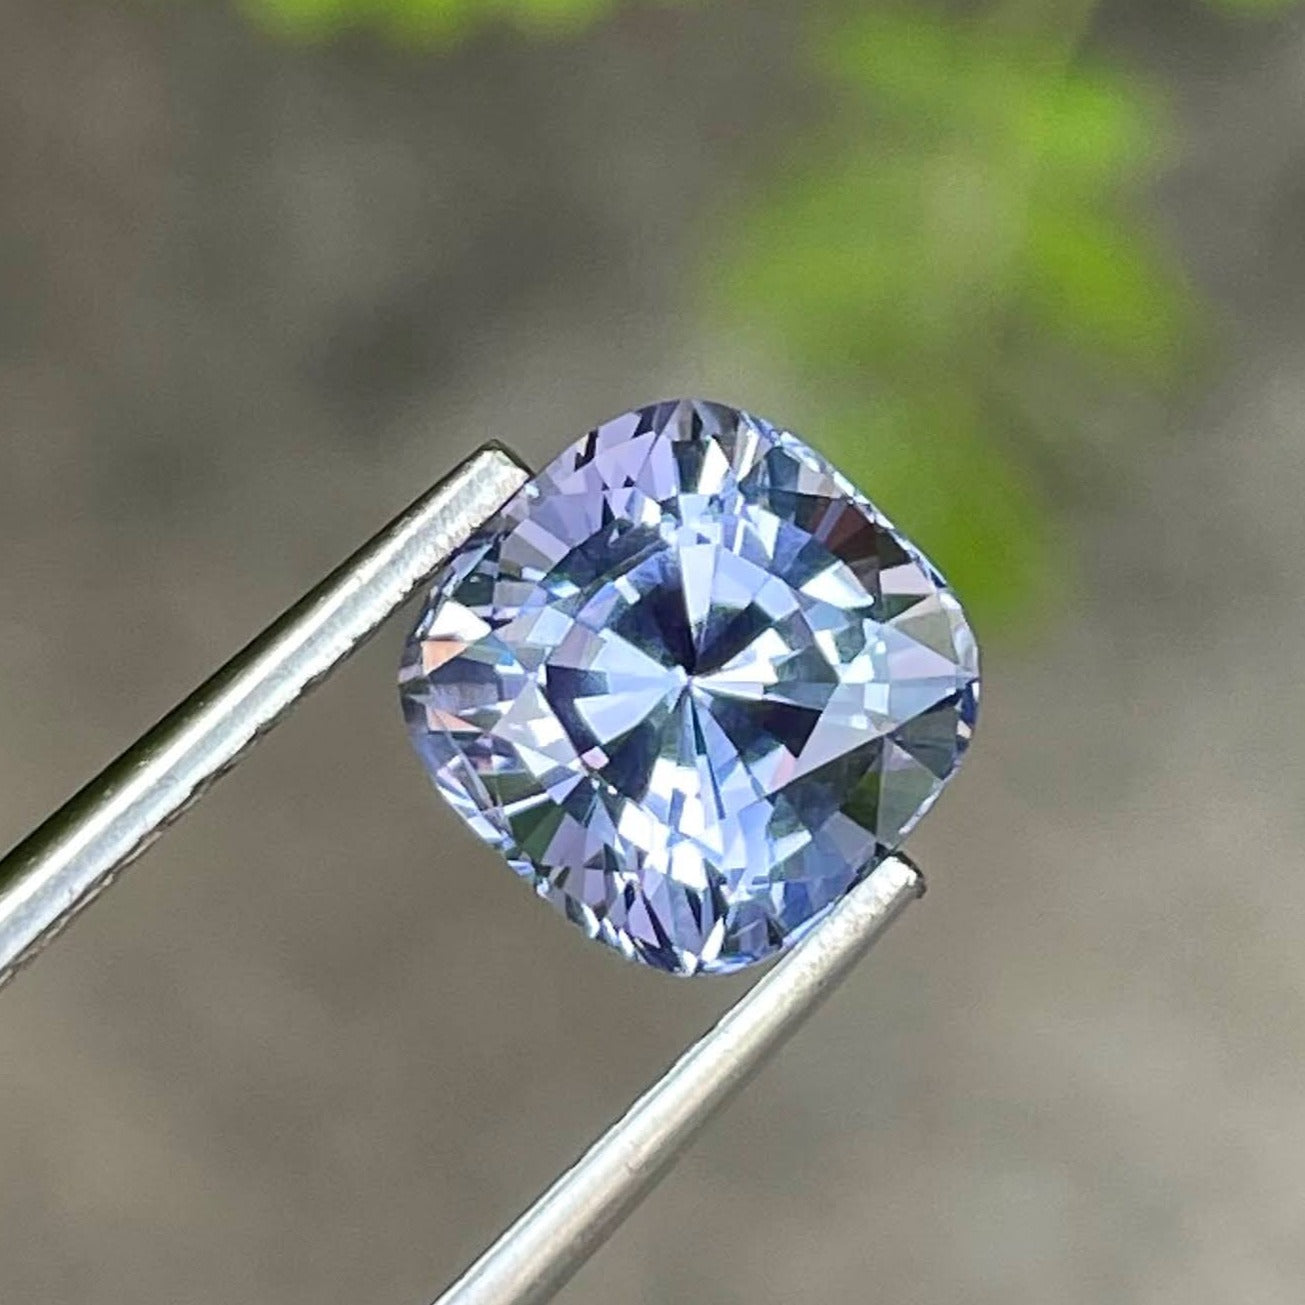 2.67 Carats Lavender Spinel Stone